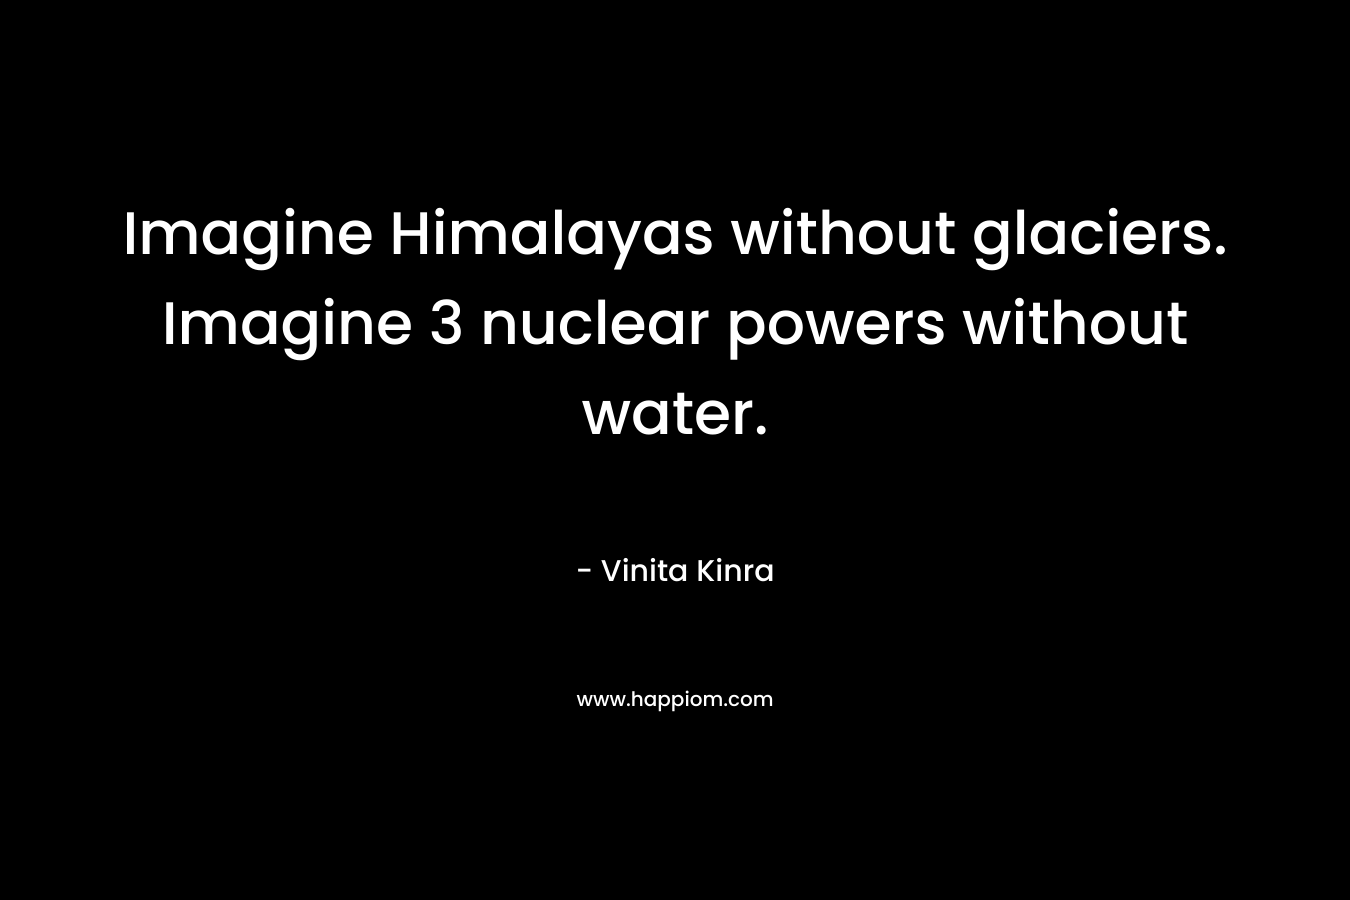 Imagine Himalayas without glaciers. Imagine 3 nuclear powers without water. – Vinita Kinra